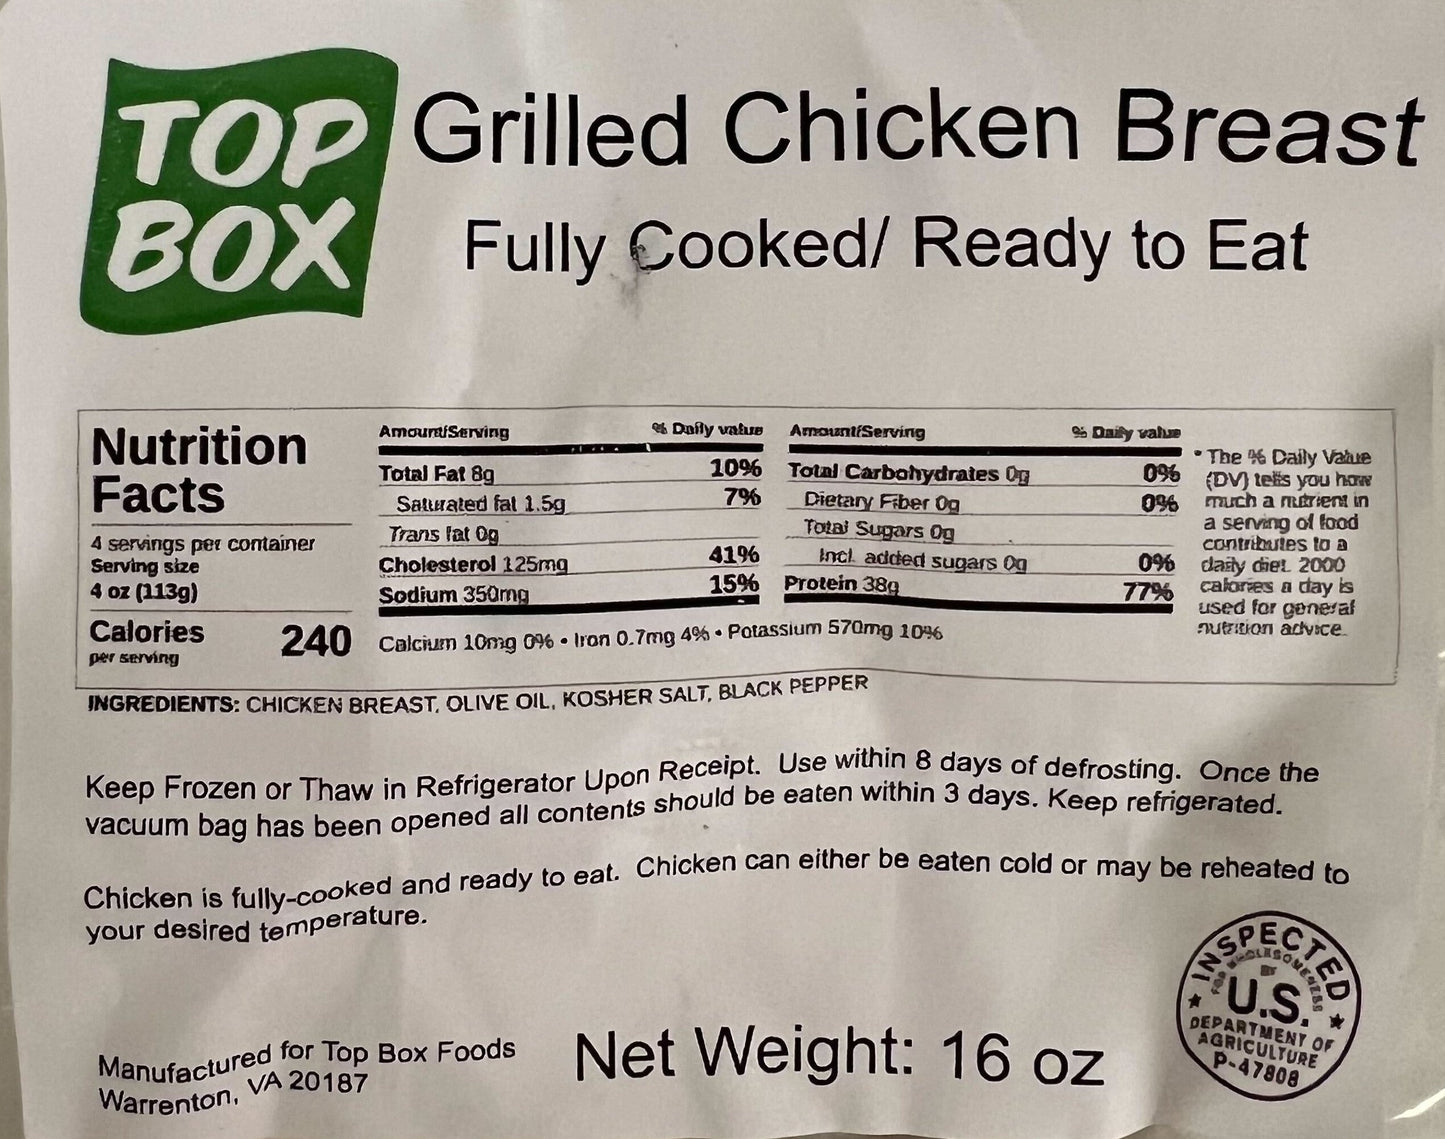 per 4oz: 8g fat, 1.5g saturated fat, 125mg cholesterol, sodium 350mg, 0 carbs, 0 fiber, 0 sugars, 38g protein, 10mg calcium, .7mg iron, 570mg potassium. ingredients: chicken breast, olive oil, kosher salt, black pepper. Keep frozen or thaw in refrigerator upon receipt. Use within 8 days of defrosting. Once opened eat all content within 3 days. Keep refrigerated. Chicken is fully cooked and ready to eat. Can be eaten cold or reheated. 16oz. 